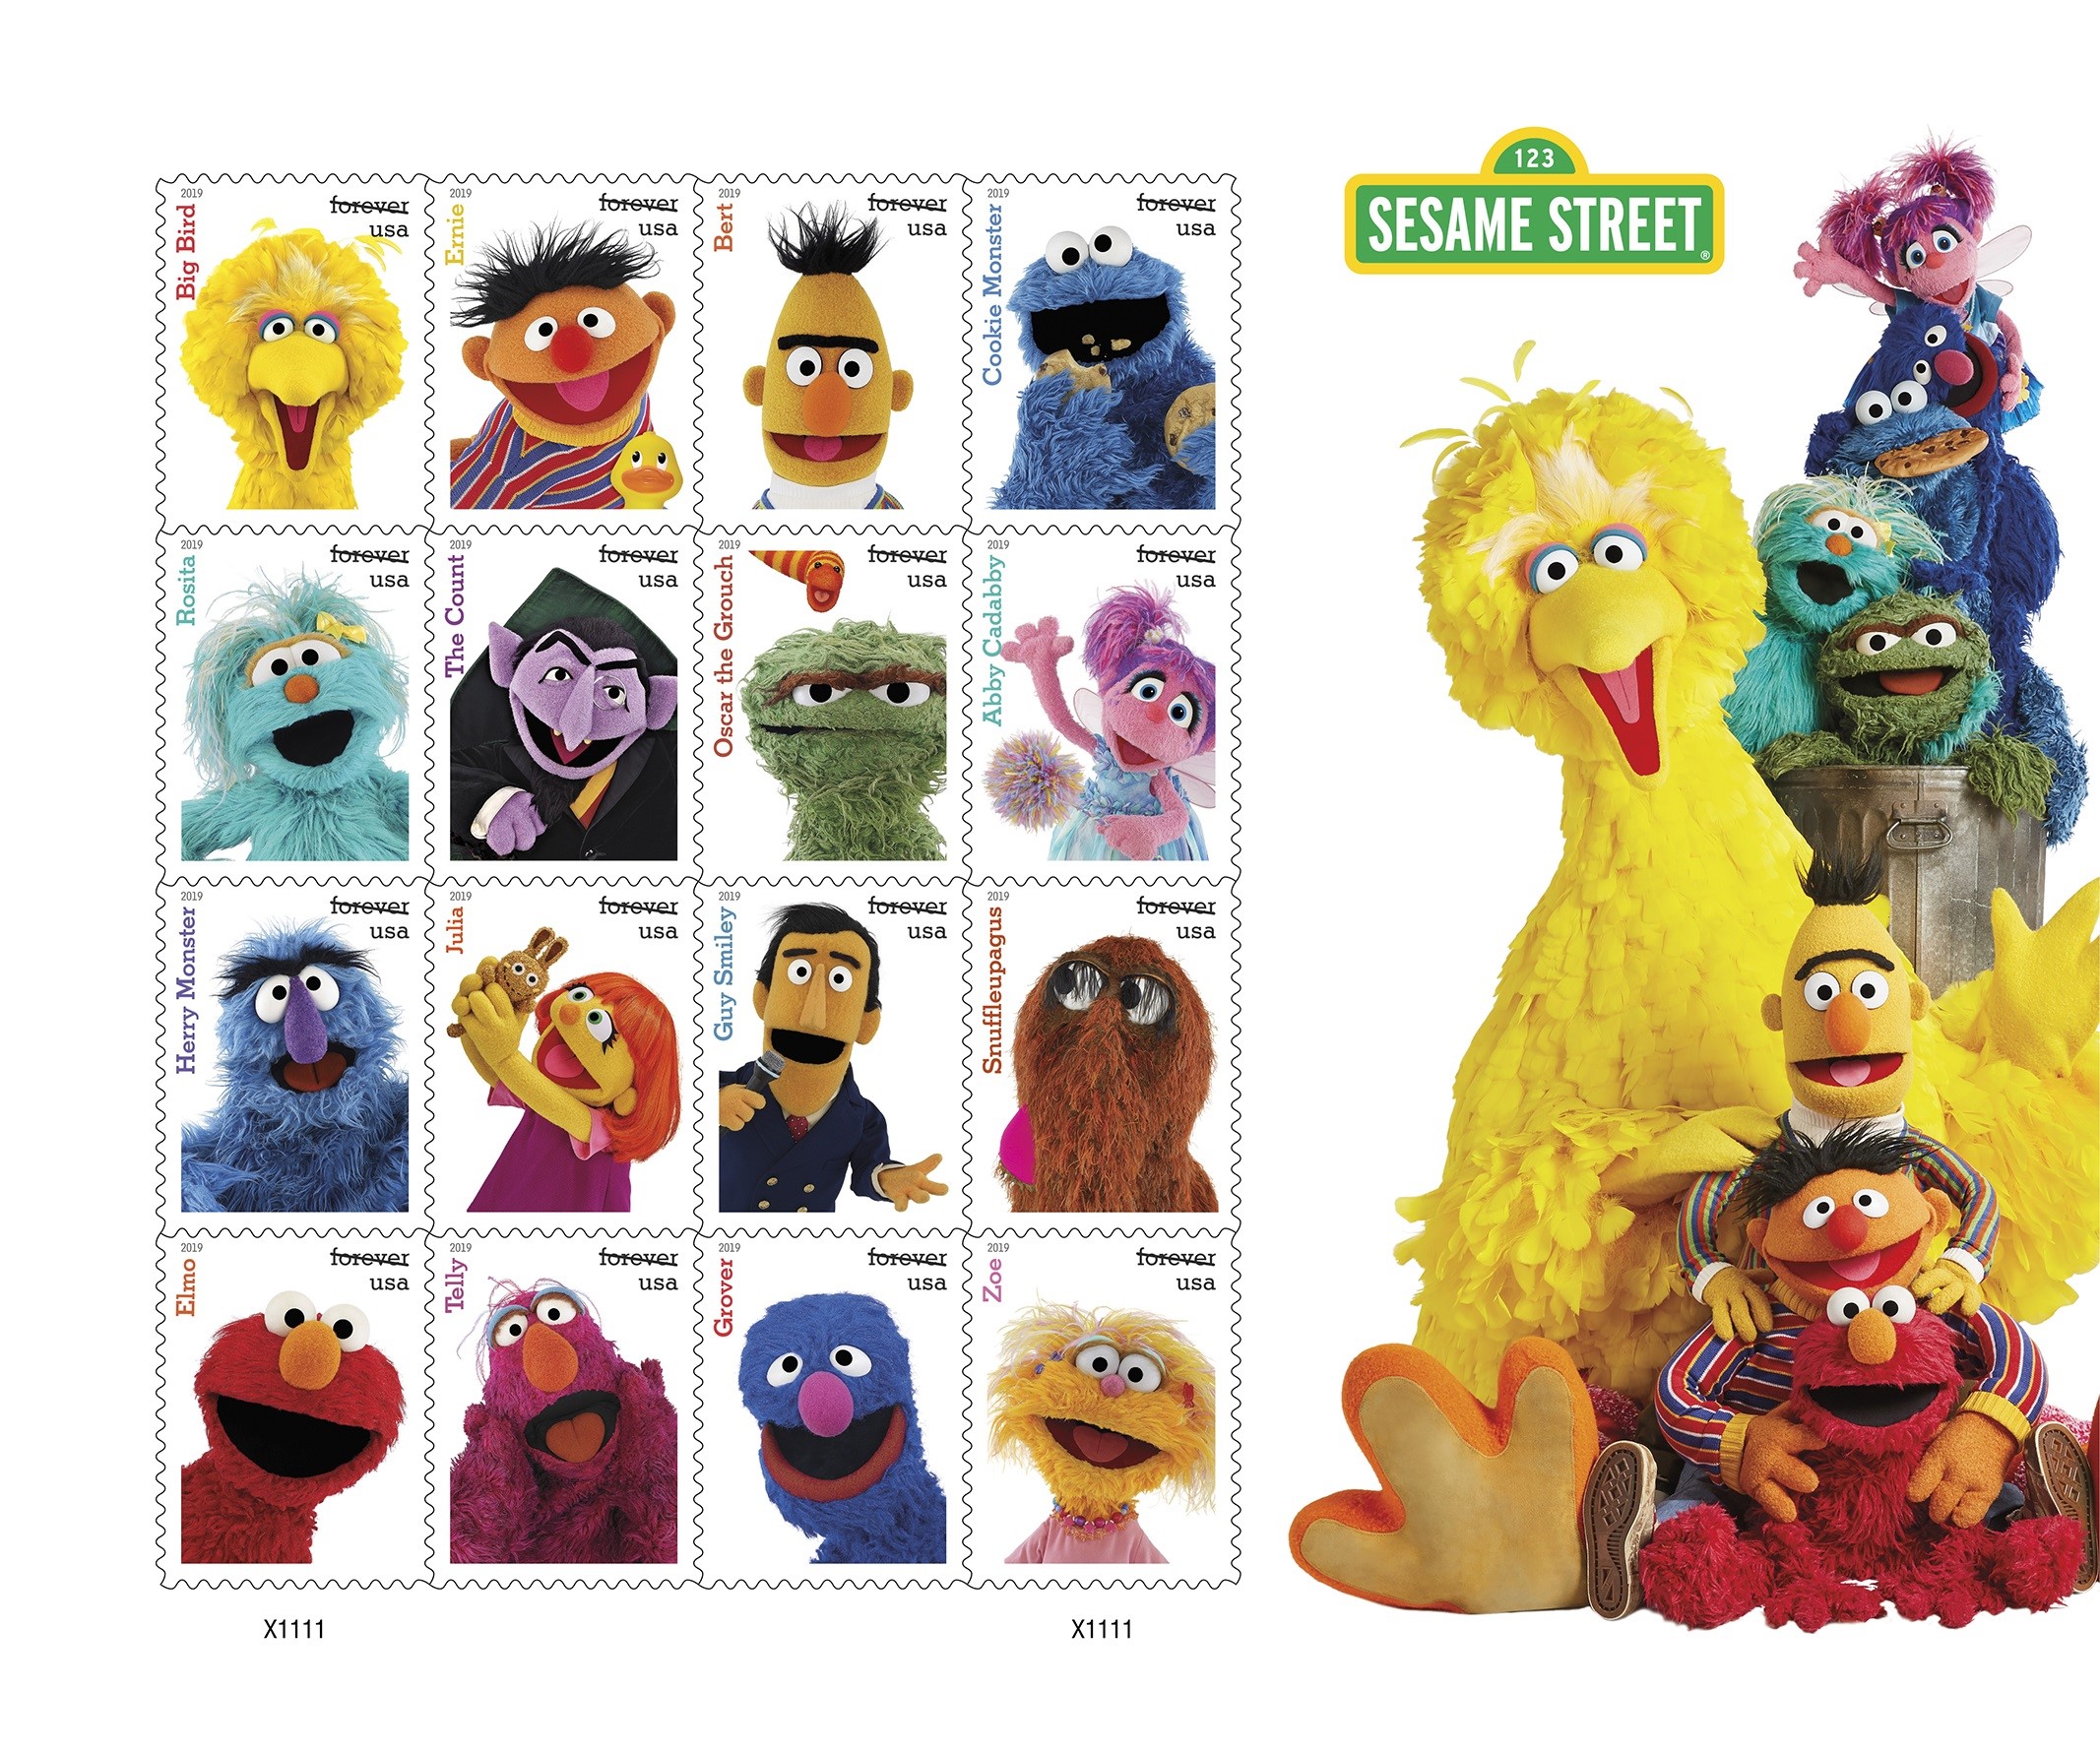 Sesame Street Forever stamps now available for purchase